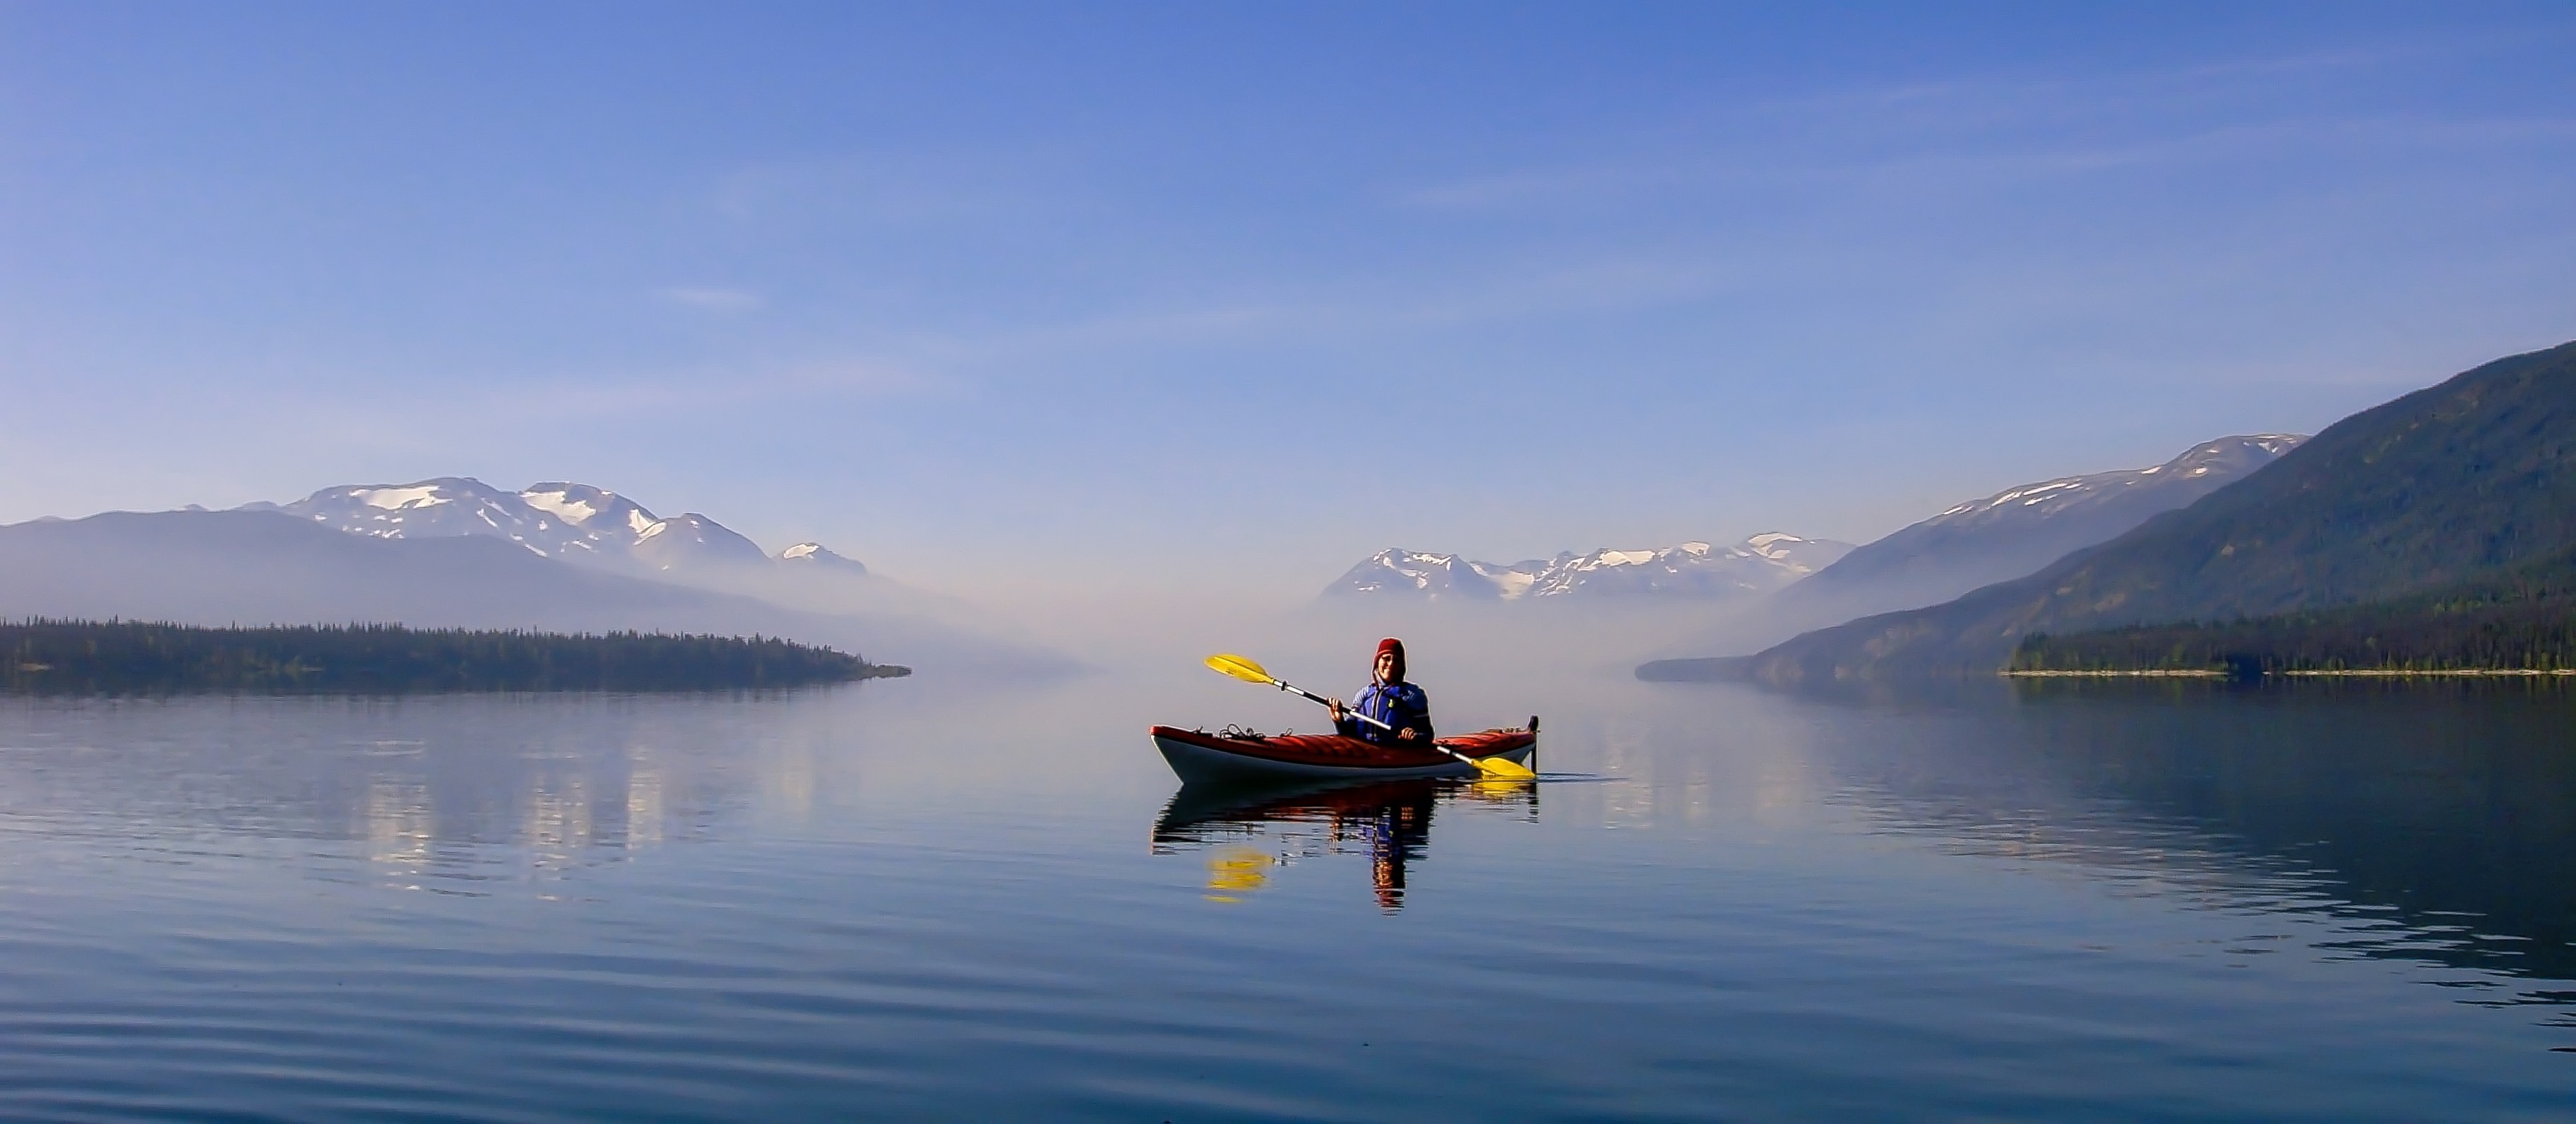 A person in a kayak at Morice Lake, British Columbia, Canada, with distant smoke from a forest fire.